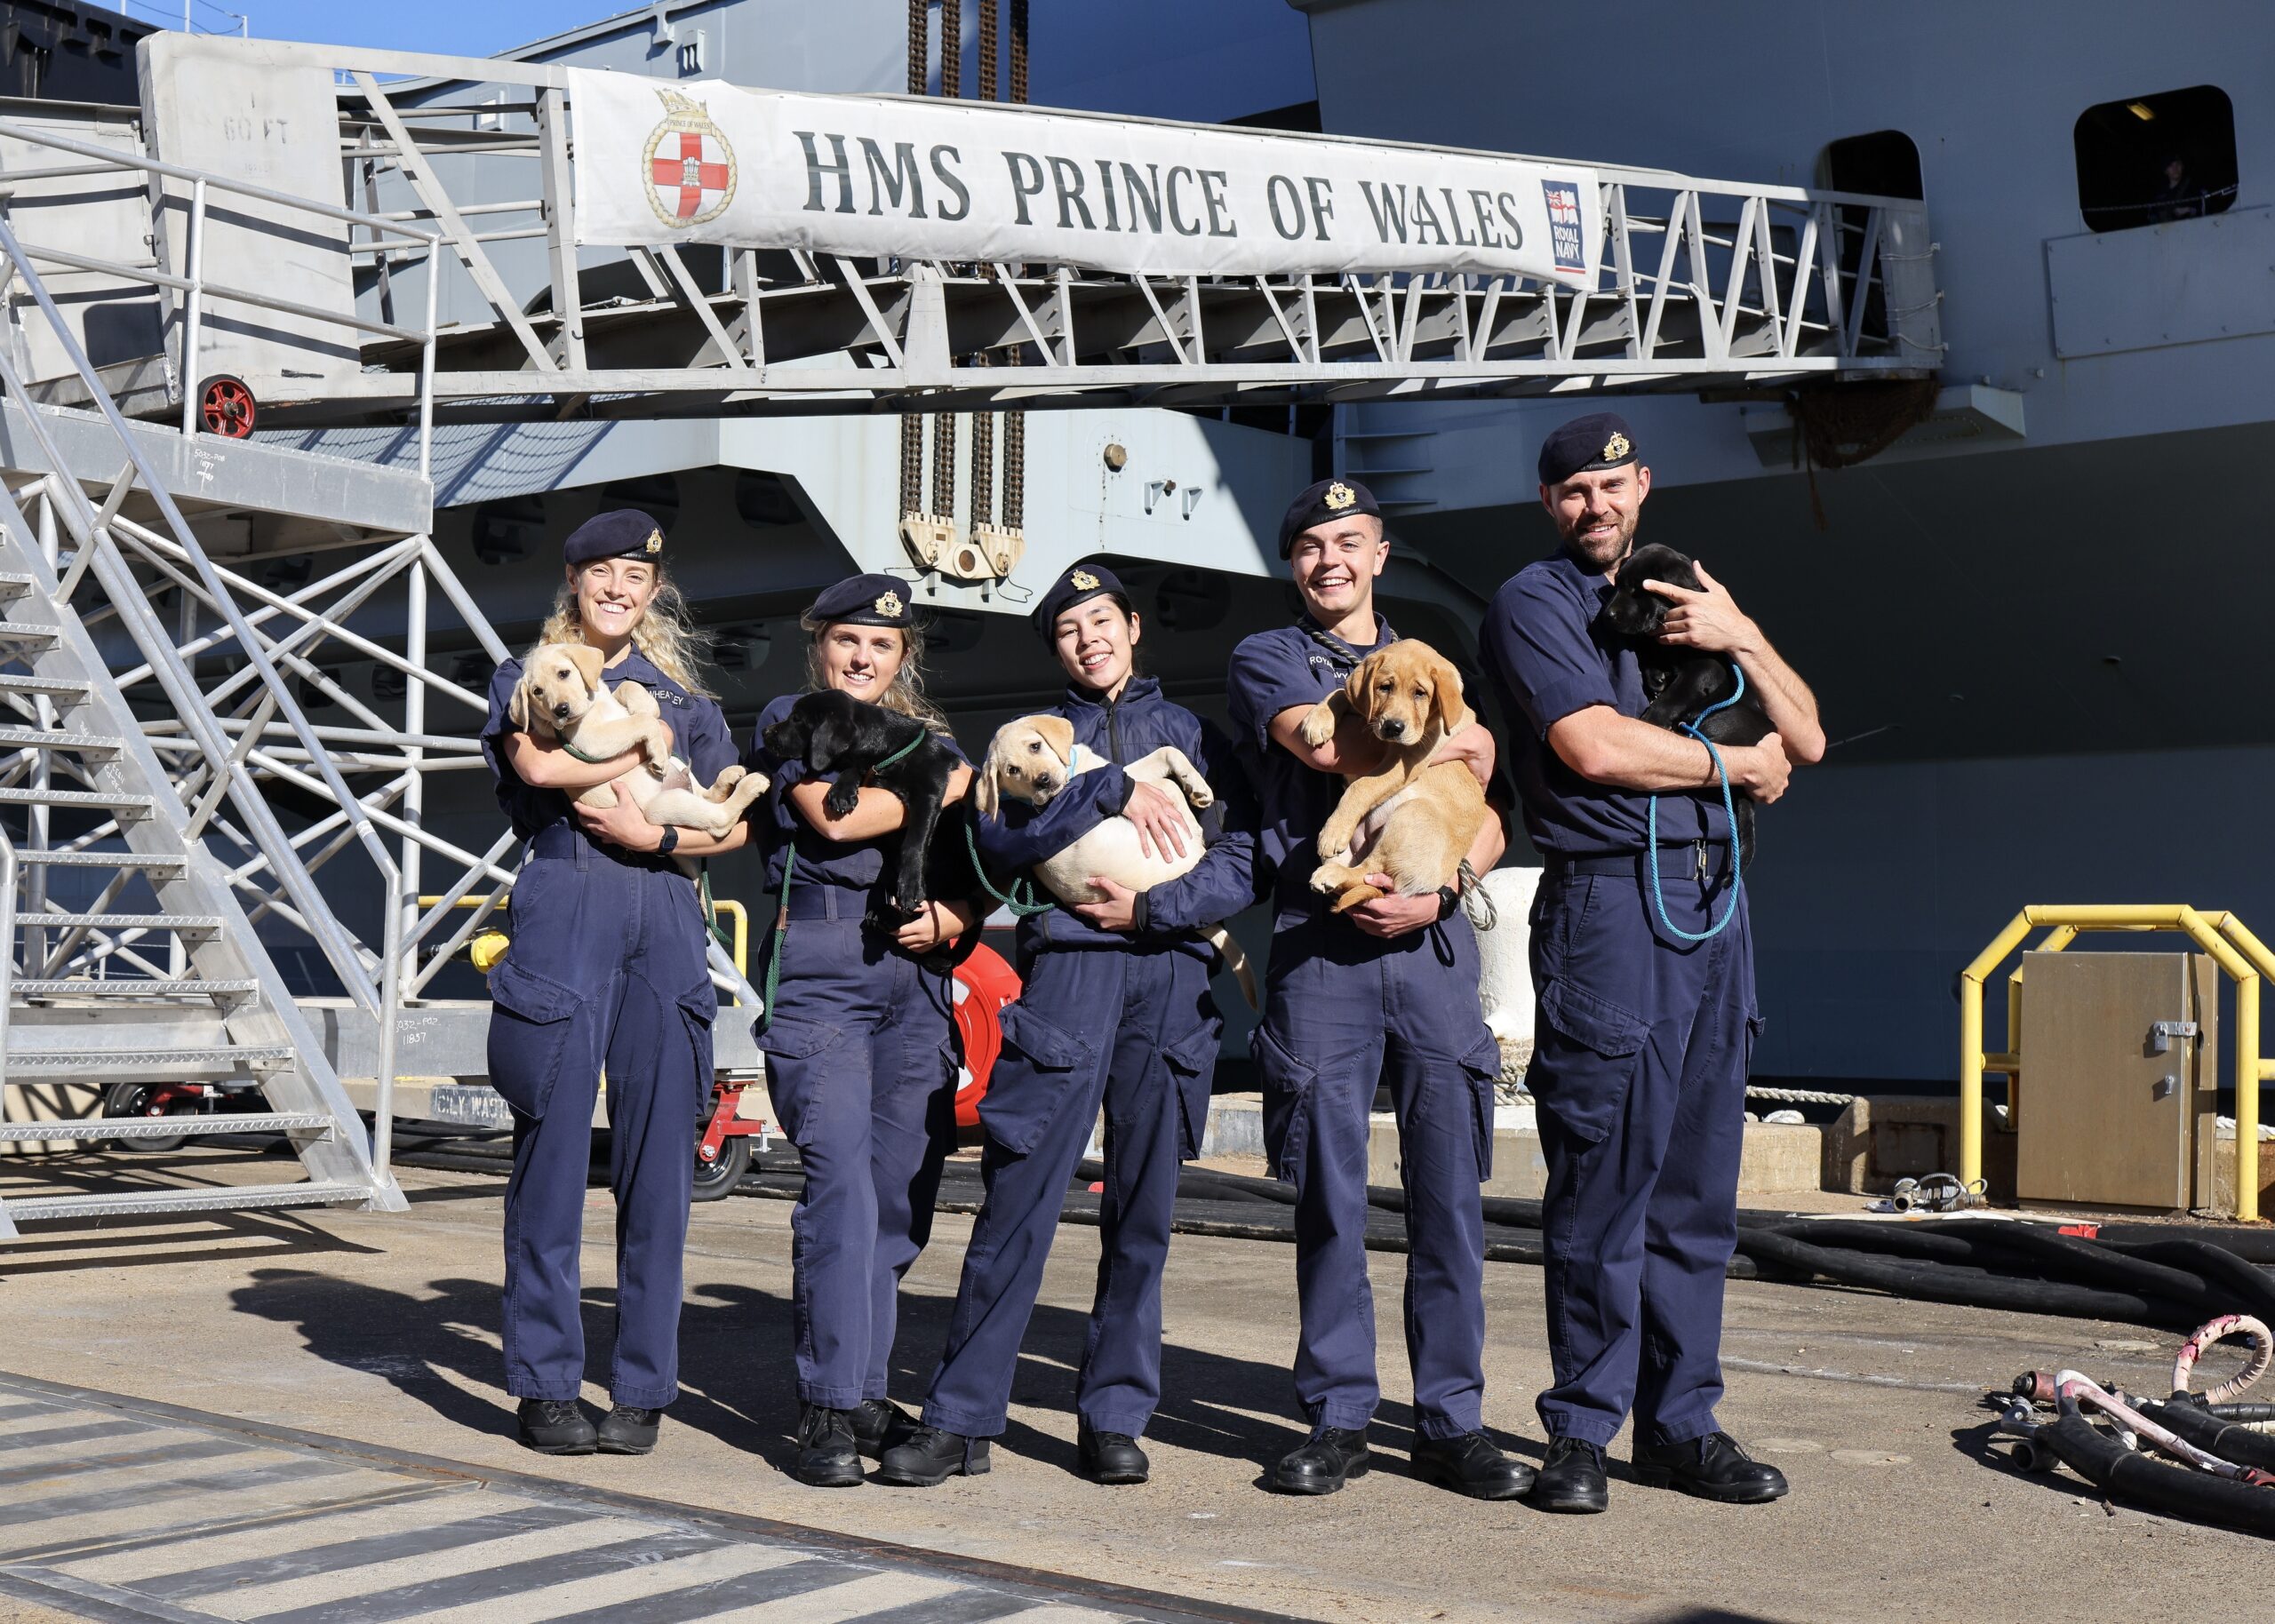 All smiles for HMS Prince of Wales sailors as dogs visit carrier